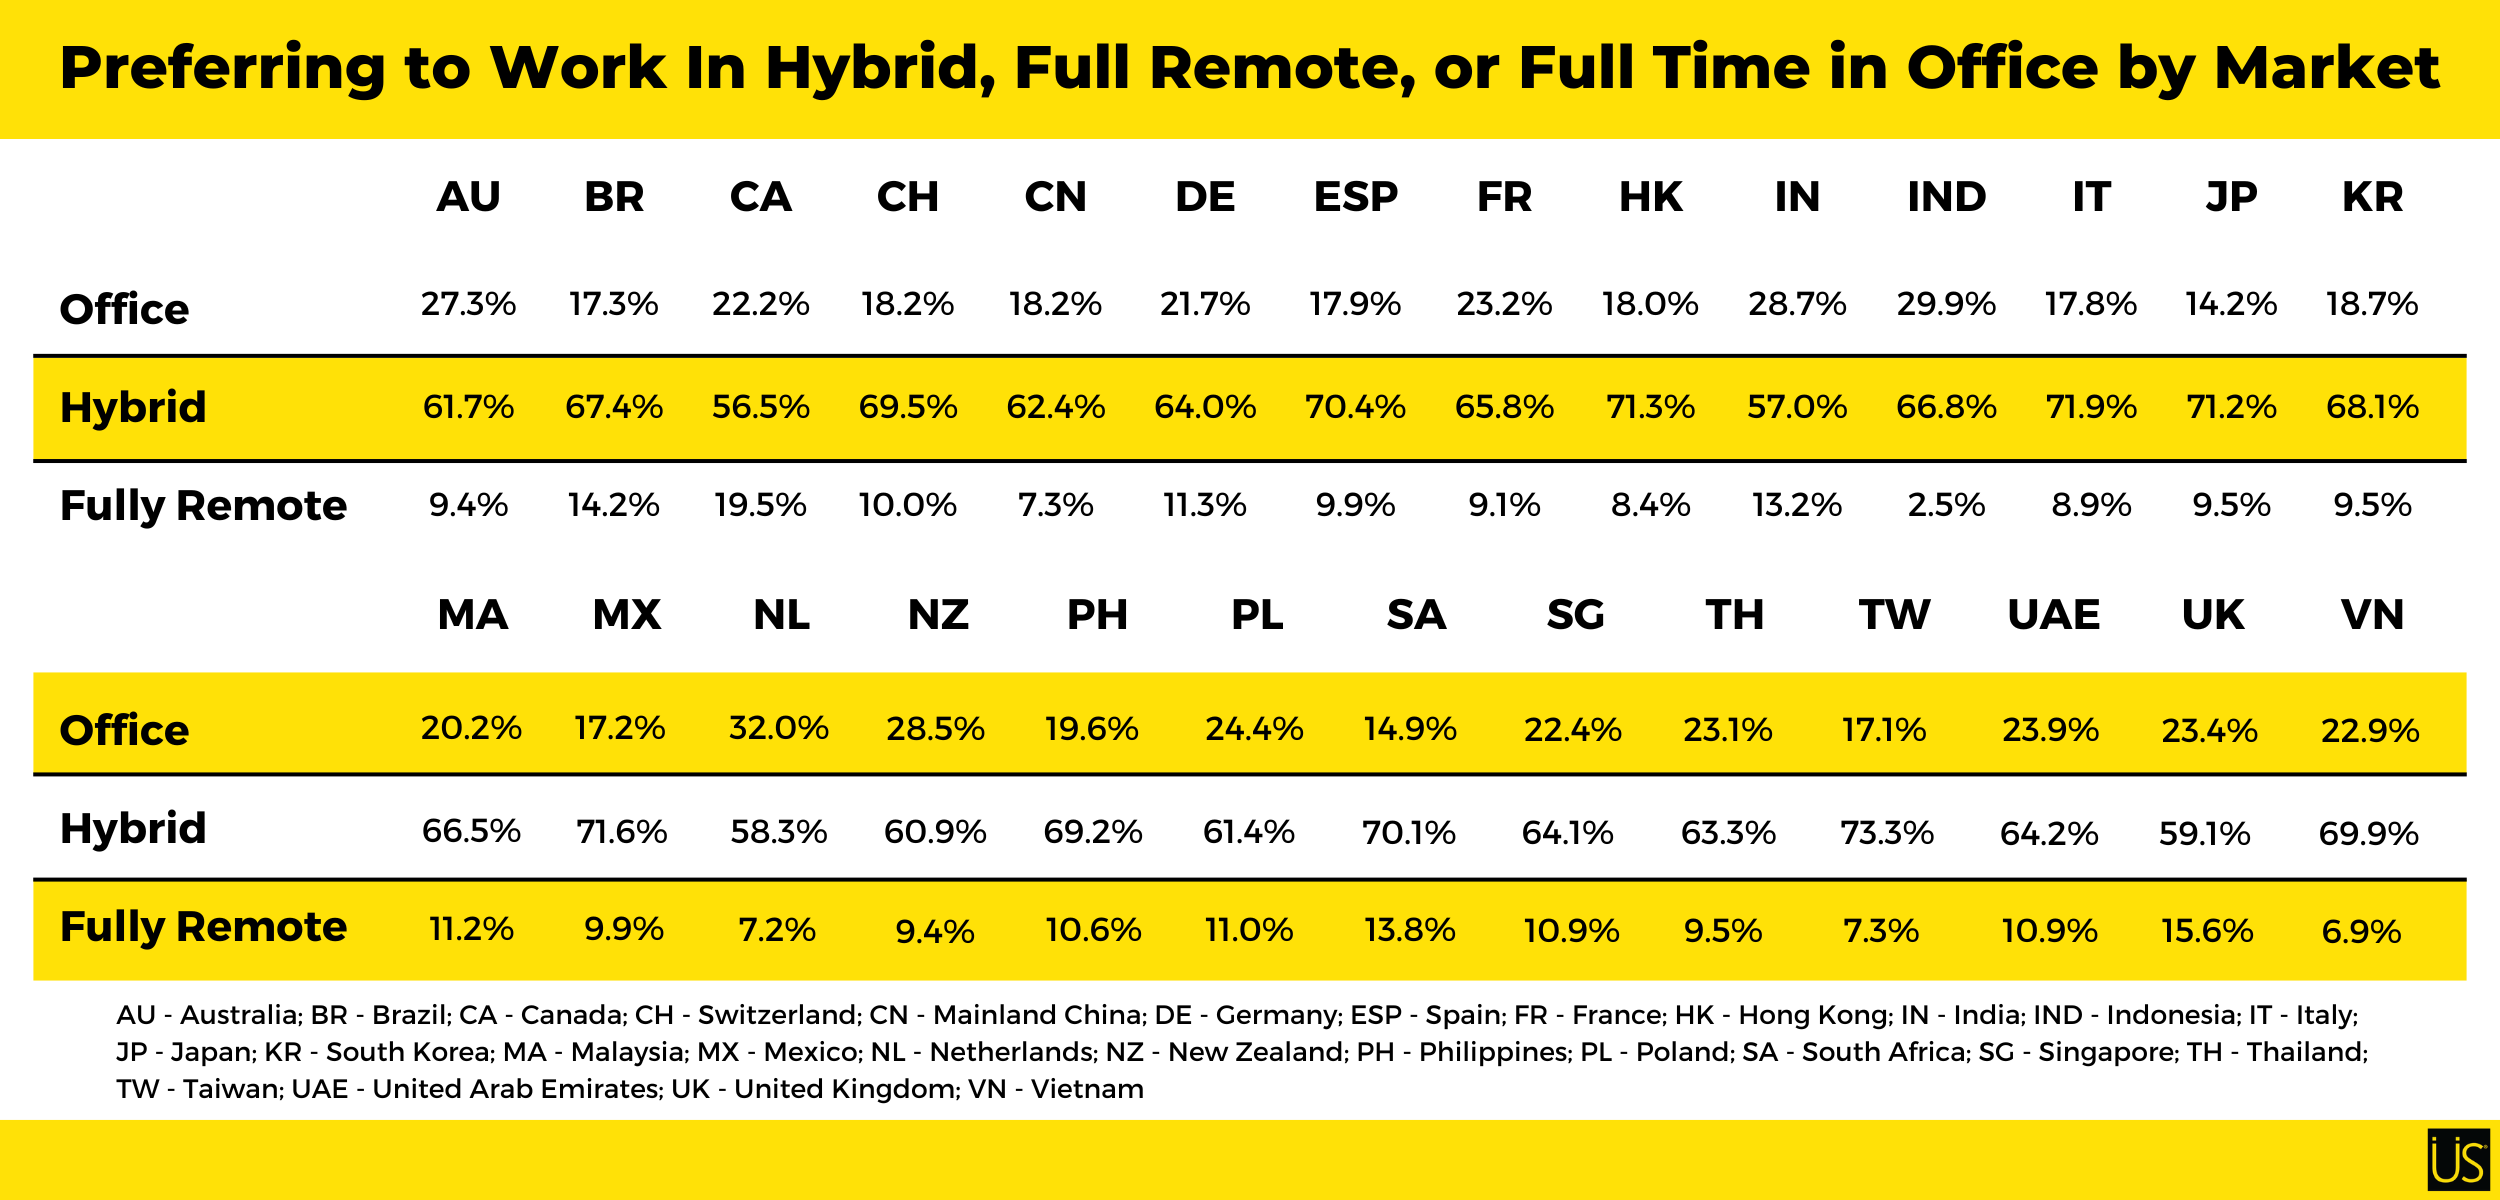 Preferring to work in hybrid, full remote, or full time